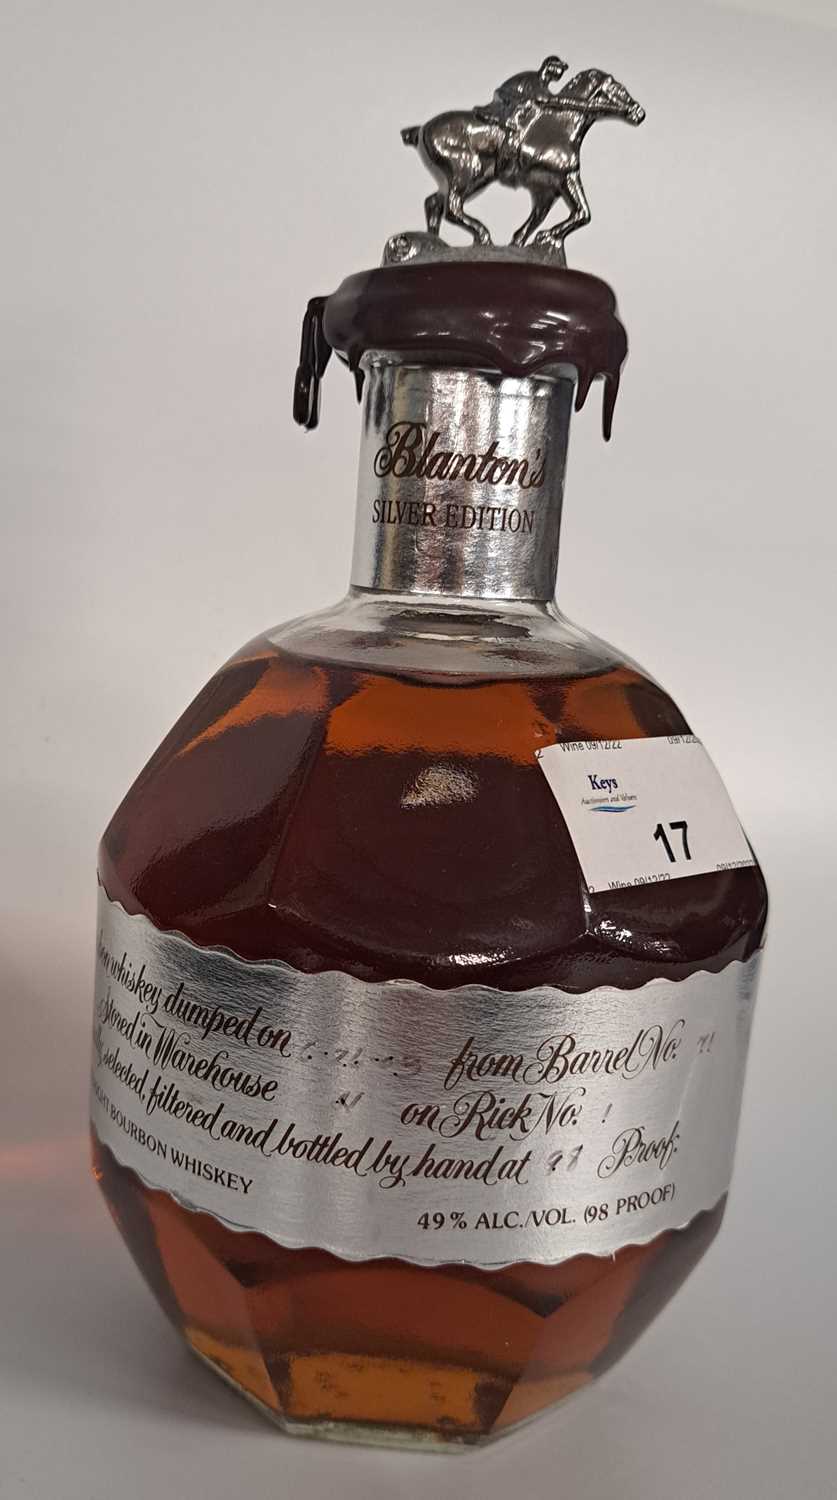 Blanton Silver Edition Bourbon Whiskey - Racehorse, from Barrel No: 71, 49% (98 Proof) Registered - Image 2 of 3